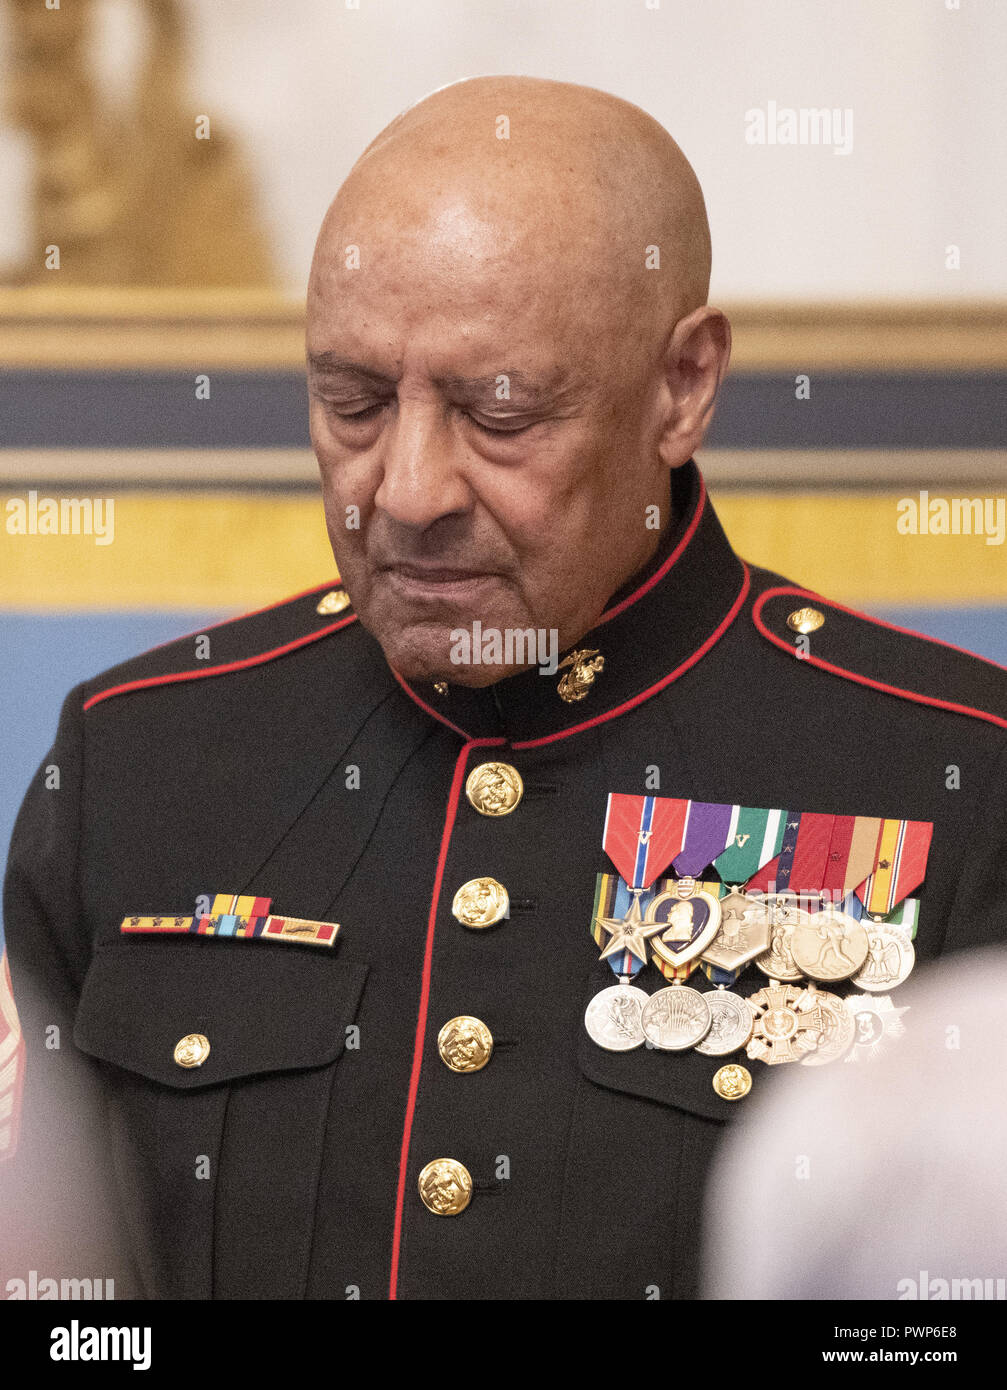 Washington, District of Columbia, USA. 17th Oct, 2018. Sergeant Major John L. Canley, United States Marine Corps (Retired) bows his head in prayer during the ceremony where US President Donald J. Trump awarded him the Medal of Honor for conspicuous gallantry during the Vietnam War in a ceremony in the East Room of the the White House in Washington, DC on Wednesday, October 17, 2018 Credit: Ron Sachs/CNP/ZUMA Wire/Alamy Live News Stock Photo